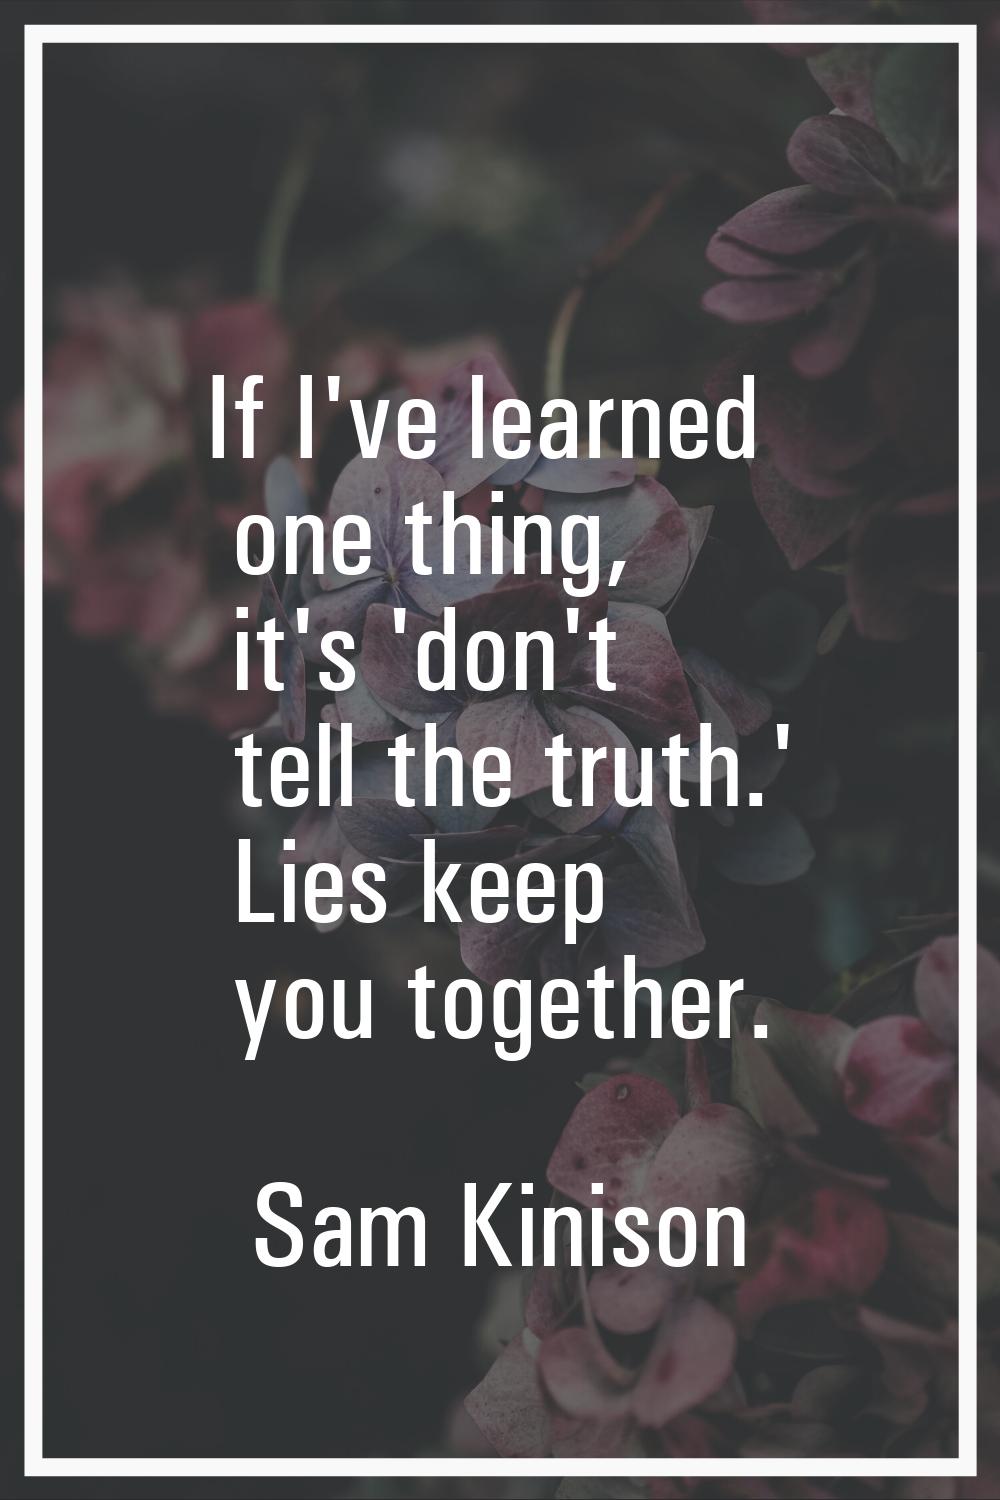 If I've learned one thing, it's 'don't tell the truth.' Lies keep you together.